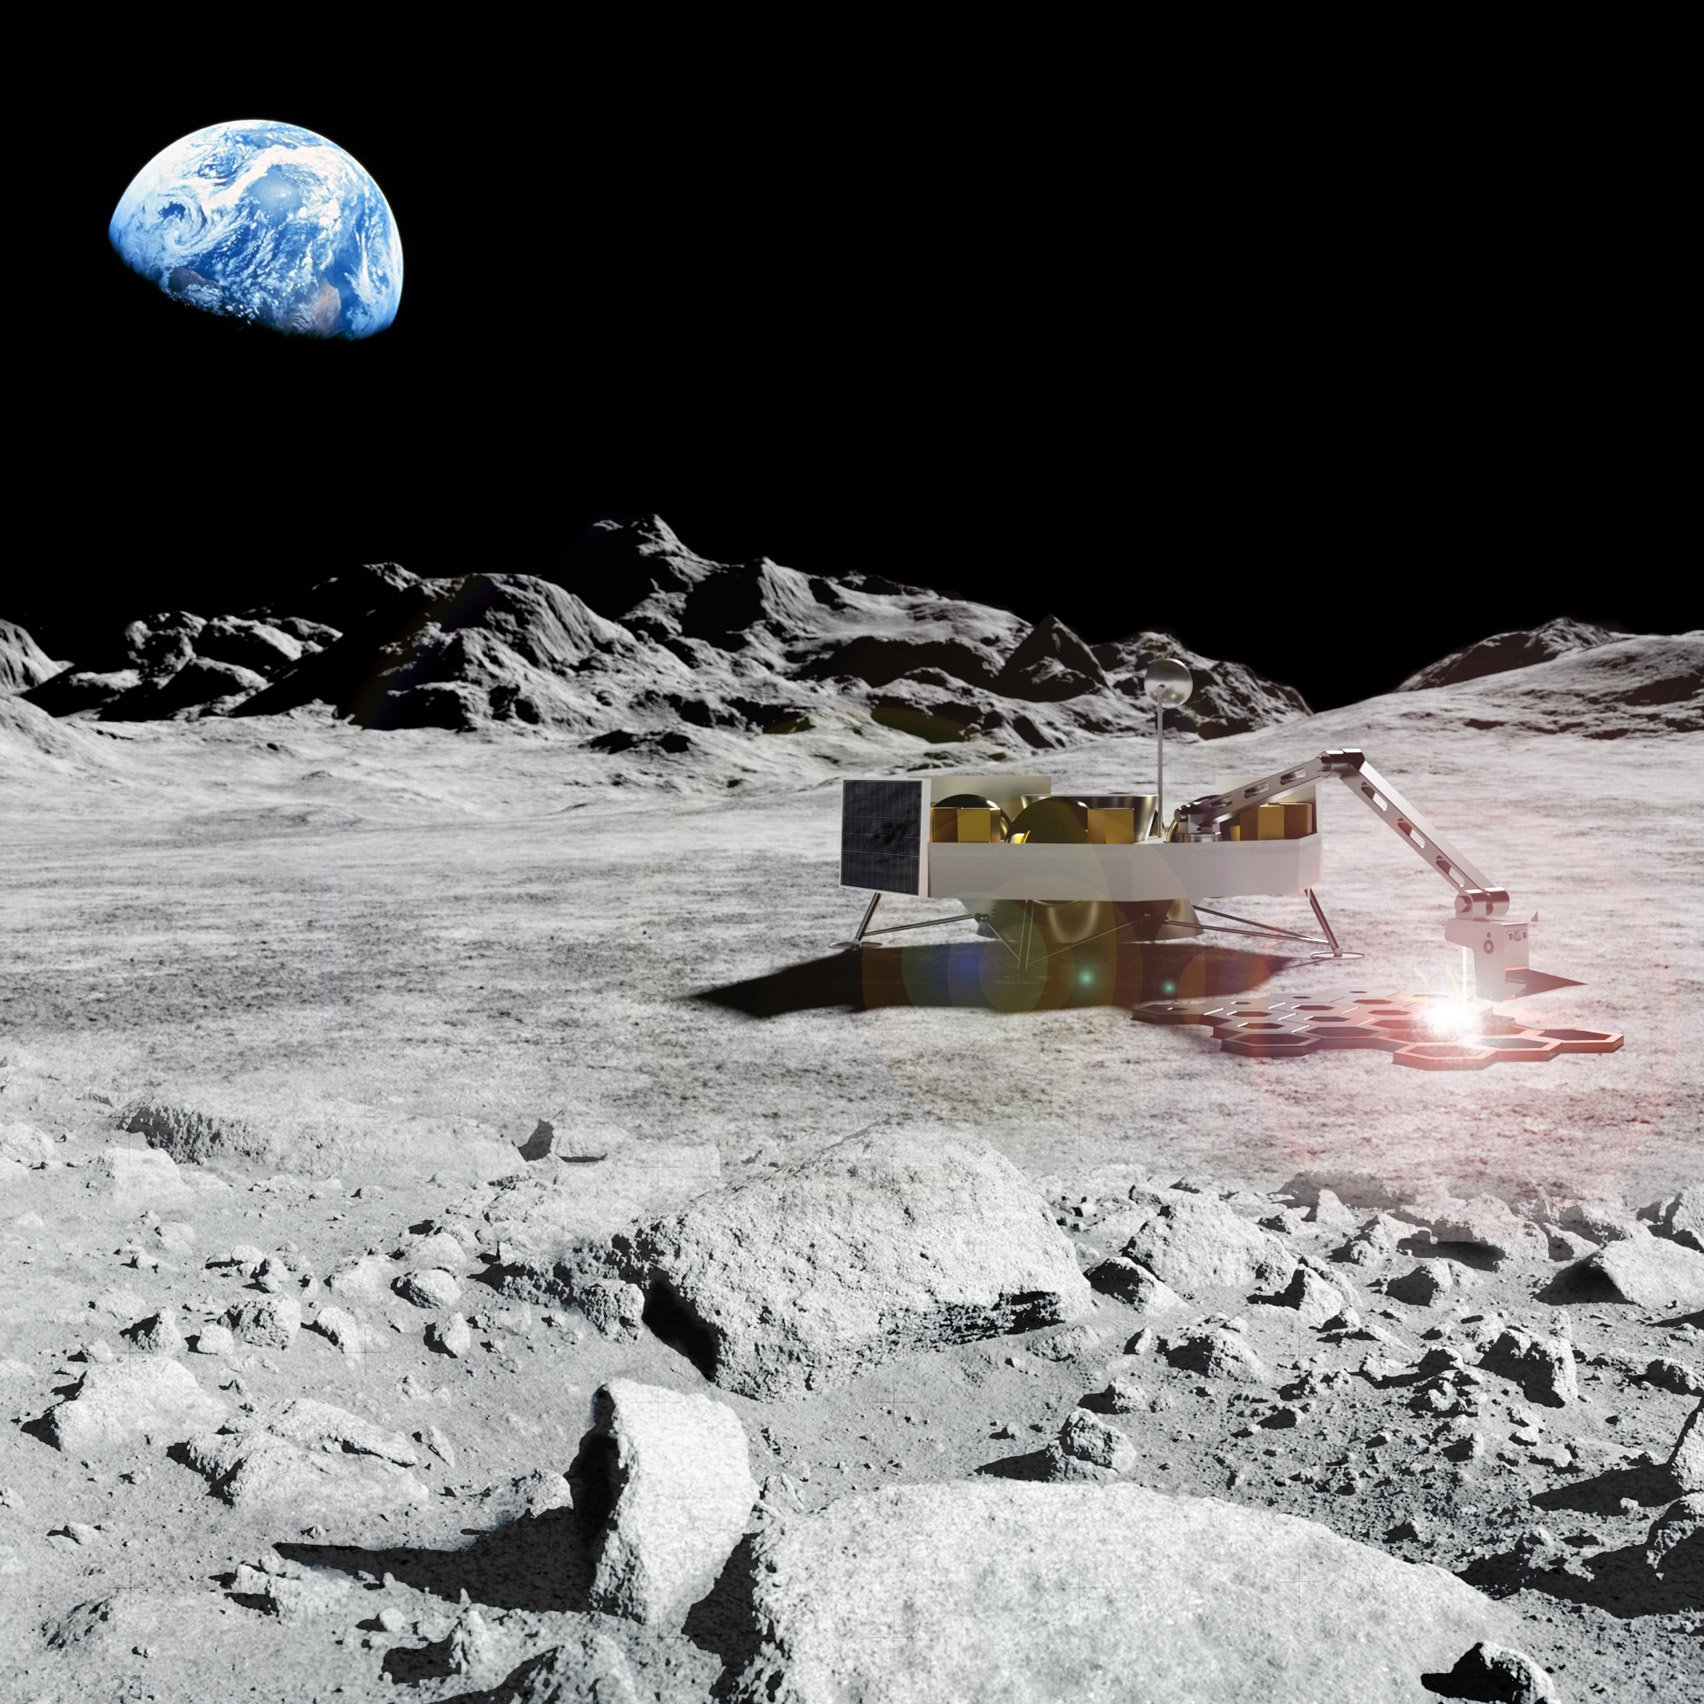 You Can Now 3D Print The Moon and View Launch Sites in AR - 3Dnatives